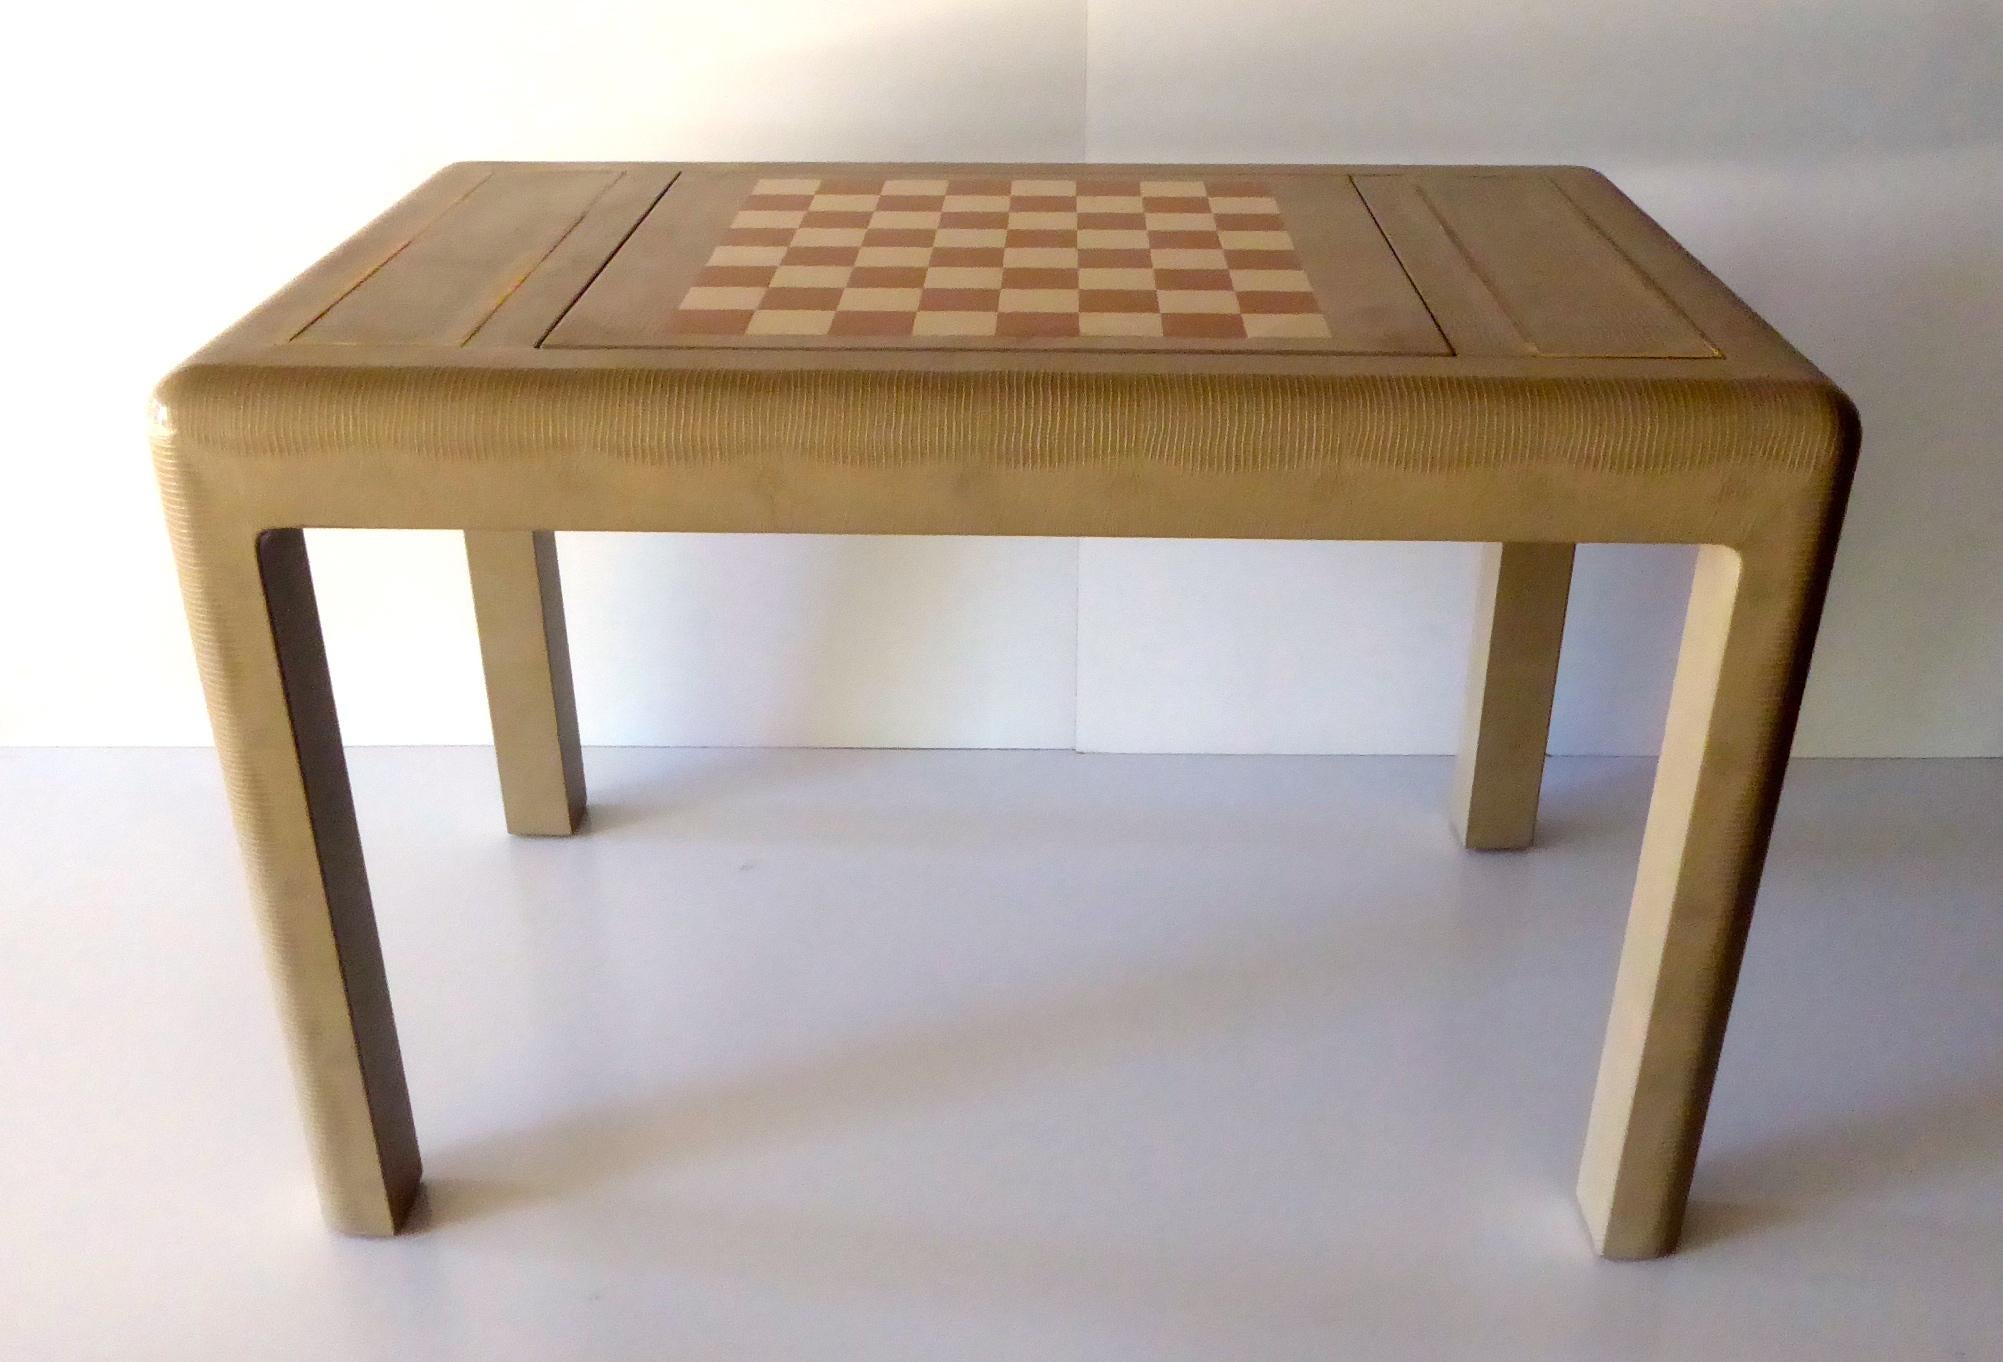 A vintage American lizard skin covered chess table, made by Karl Springer, circa 1986. The top of the table has three sections that are edged in brass. When the centre section is removed, it reveals a chess/checkerboard and one of the felt-lined